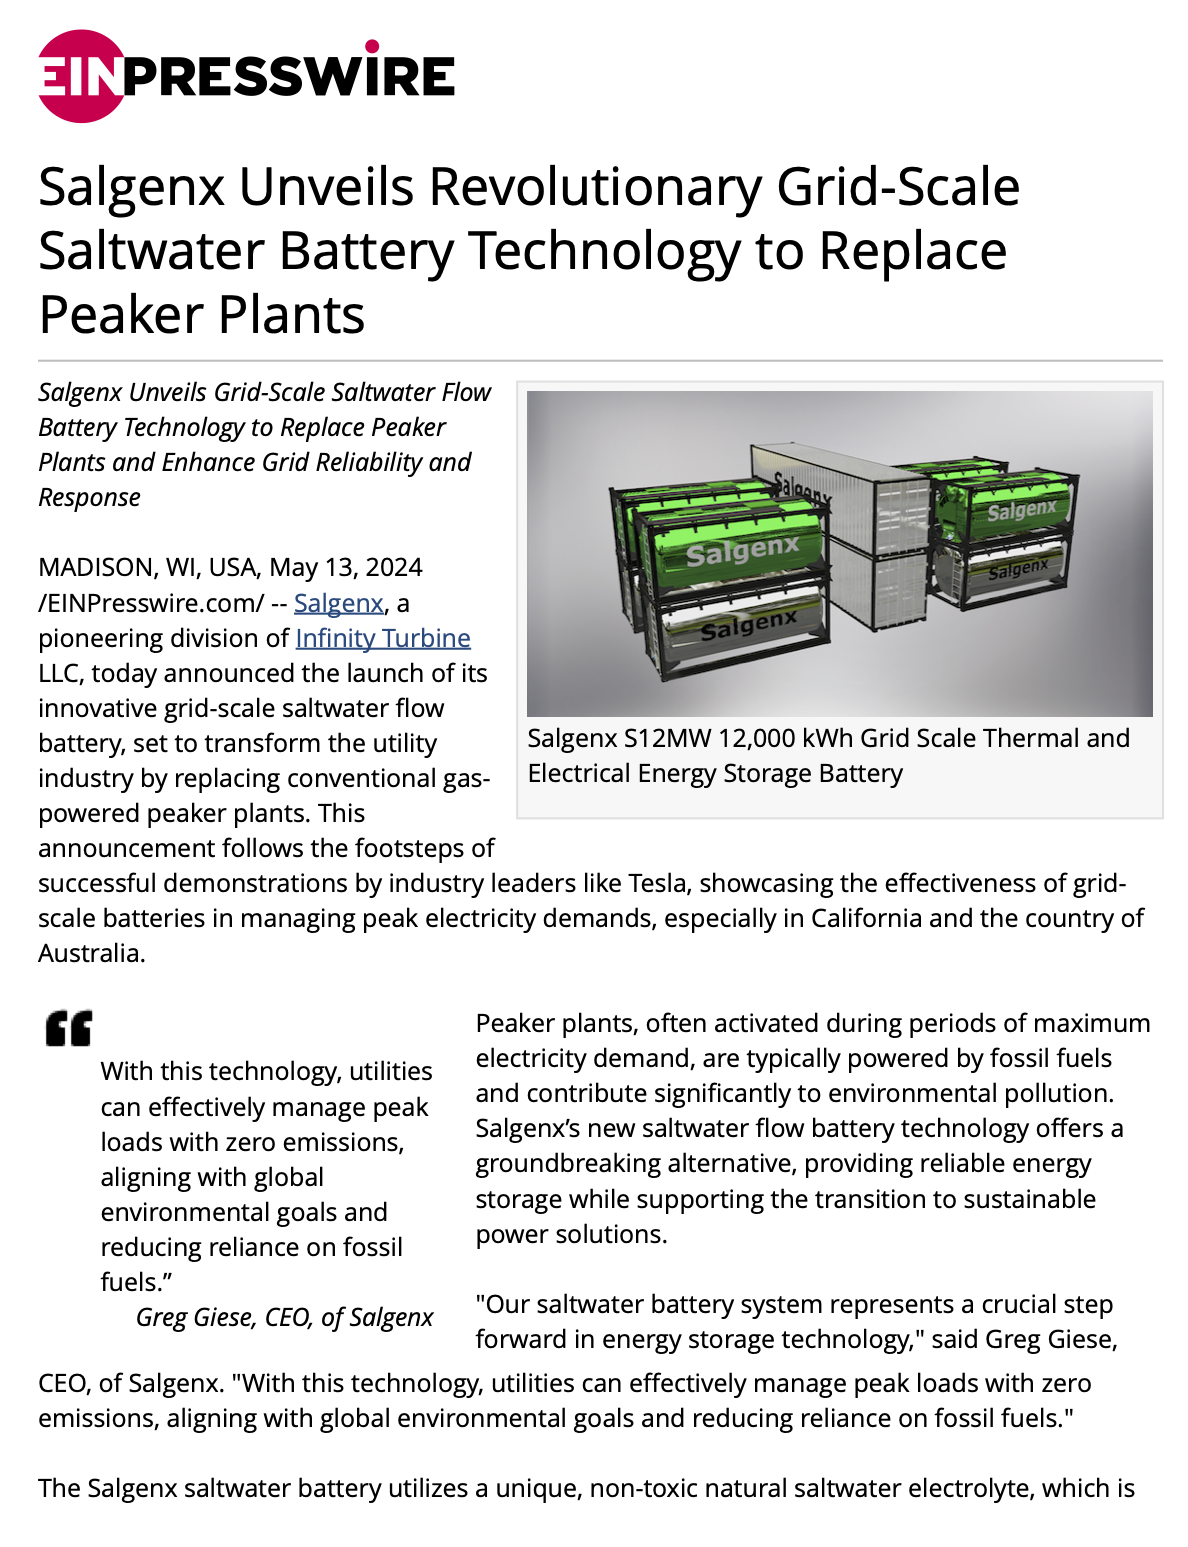 Salgenx Unveils Revolutionary Grid-Scale Saltwater Battery Technology to Replace Peaker Plants